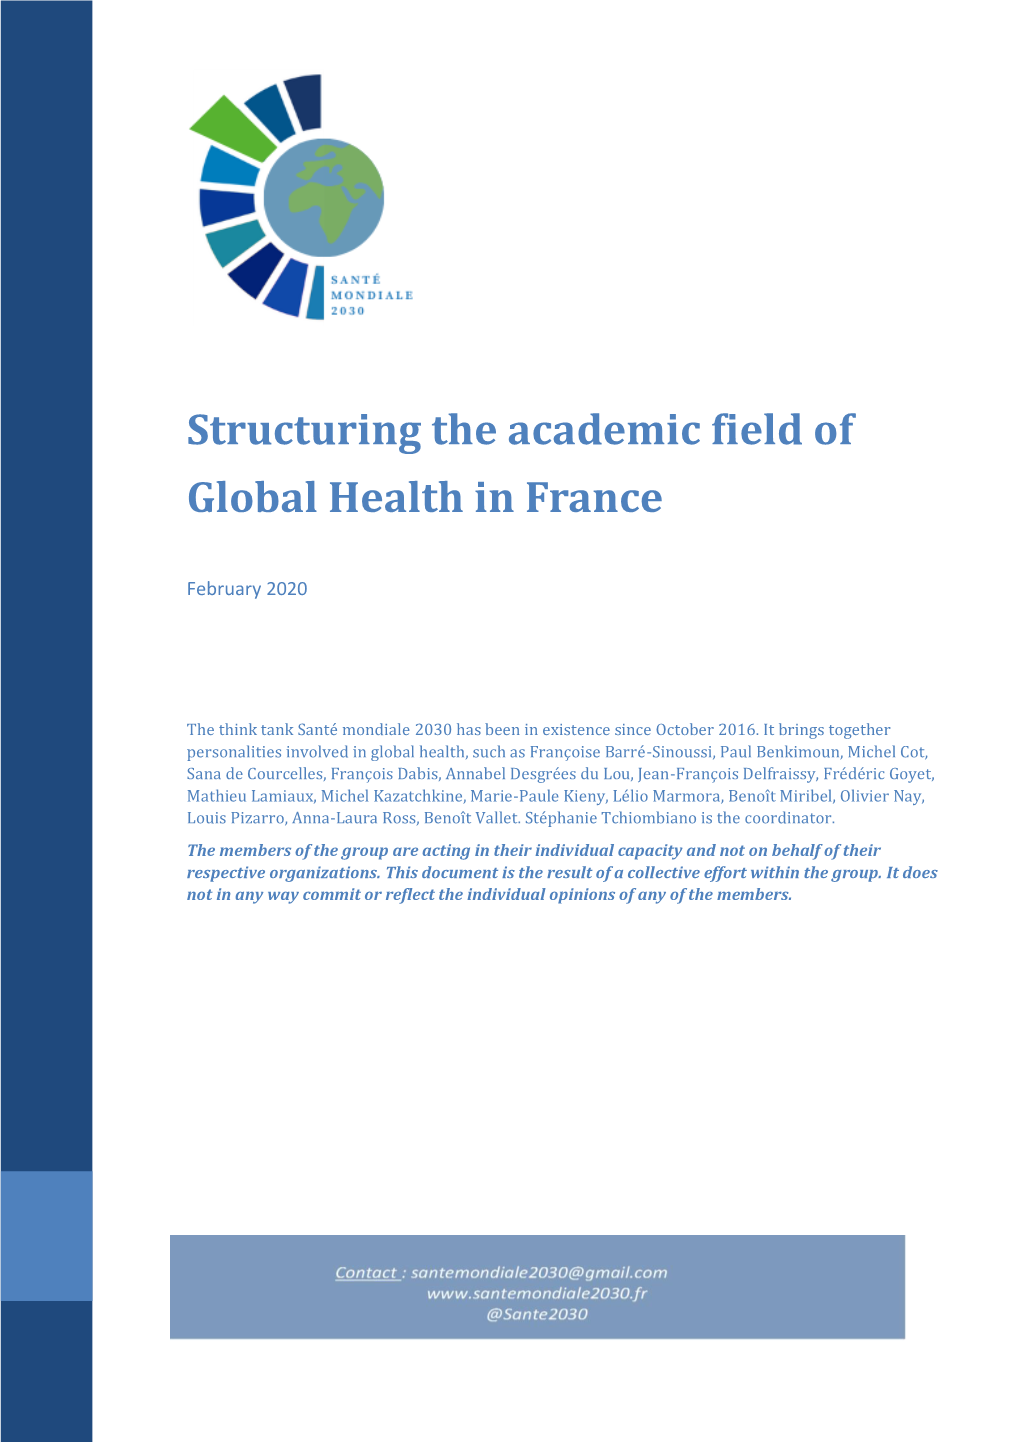 Structuring the Academic Field of Global Health in France